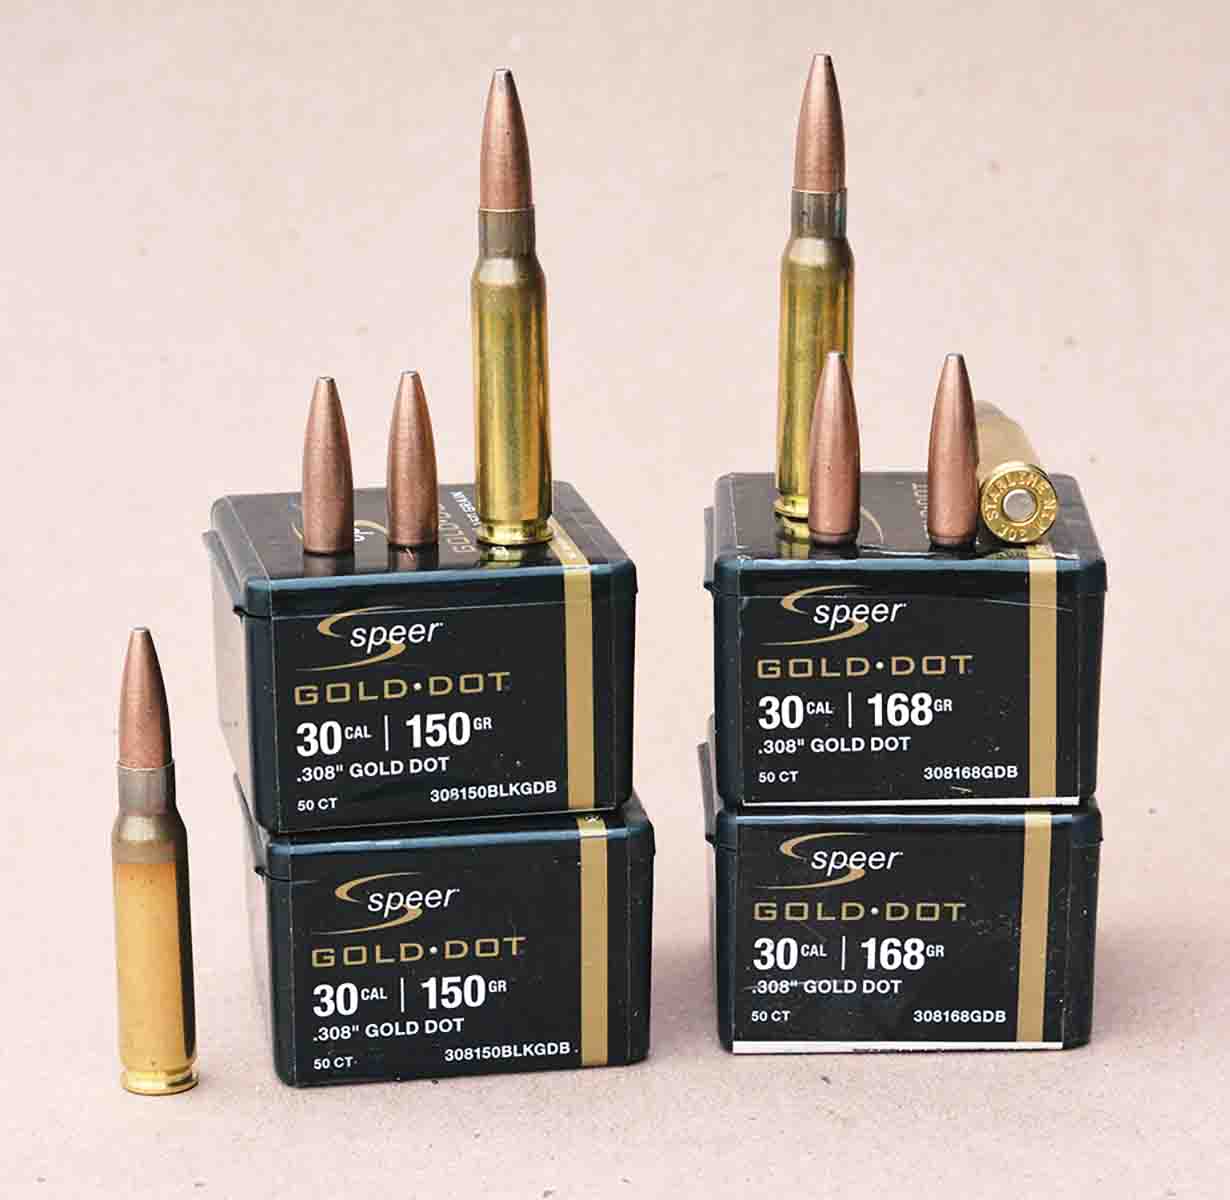 Speer Gold Dot bullets are available in 150- and 168-grain weights and feature bonded construction that results in excellent terminal performance on game.